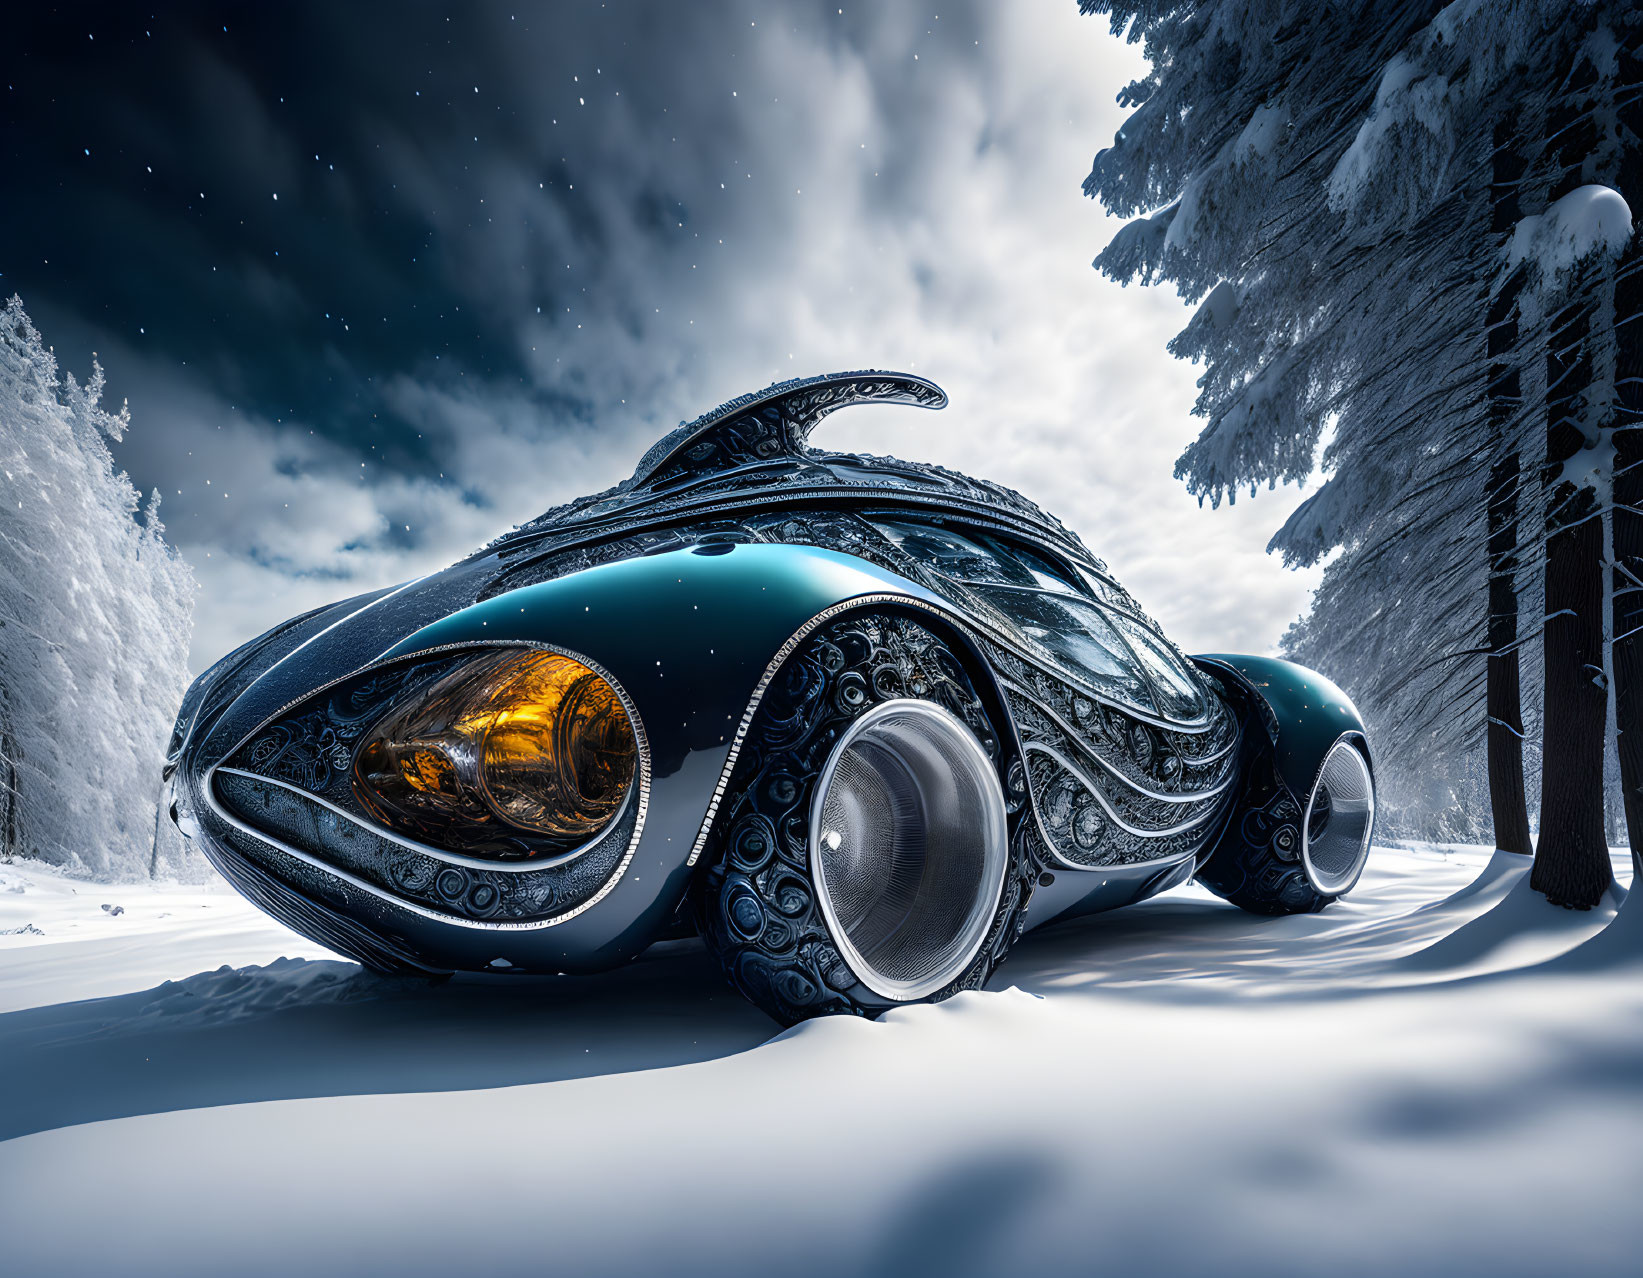 Sleek futuristic car parked in snowy forest under starry sky